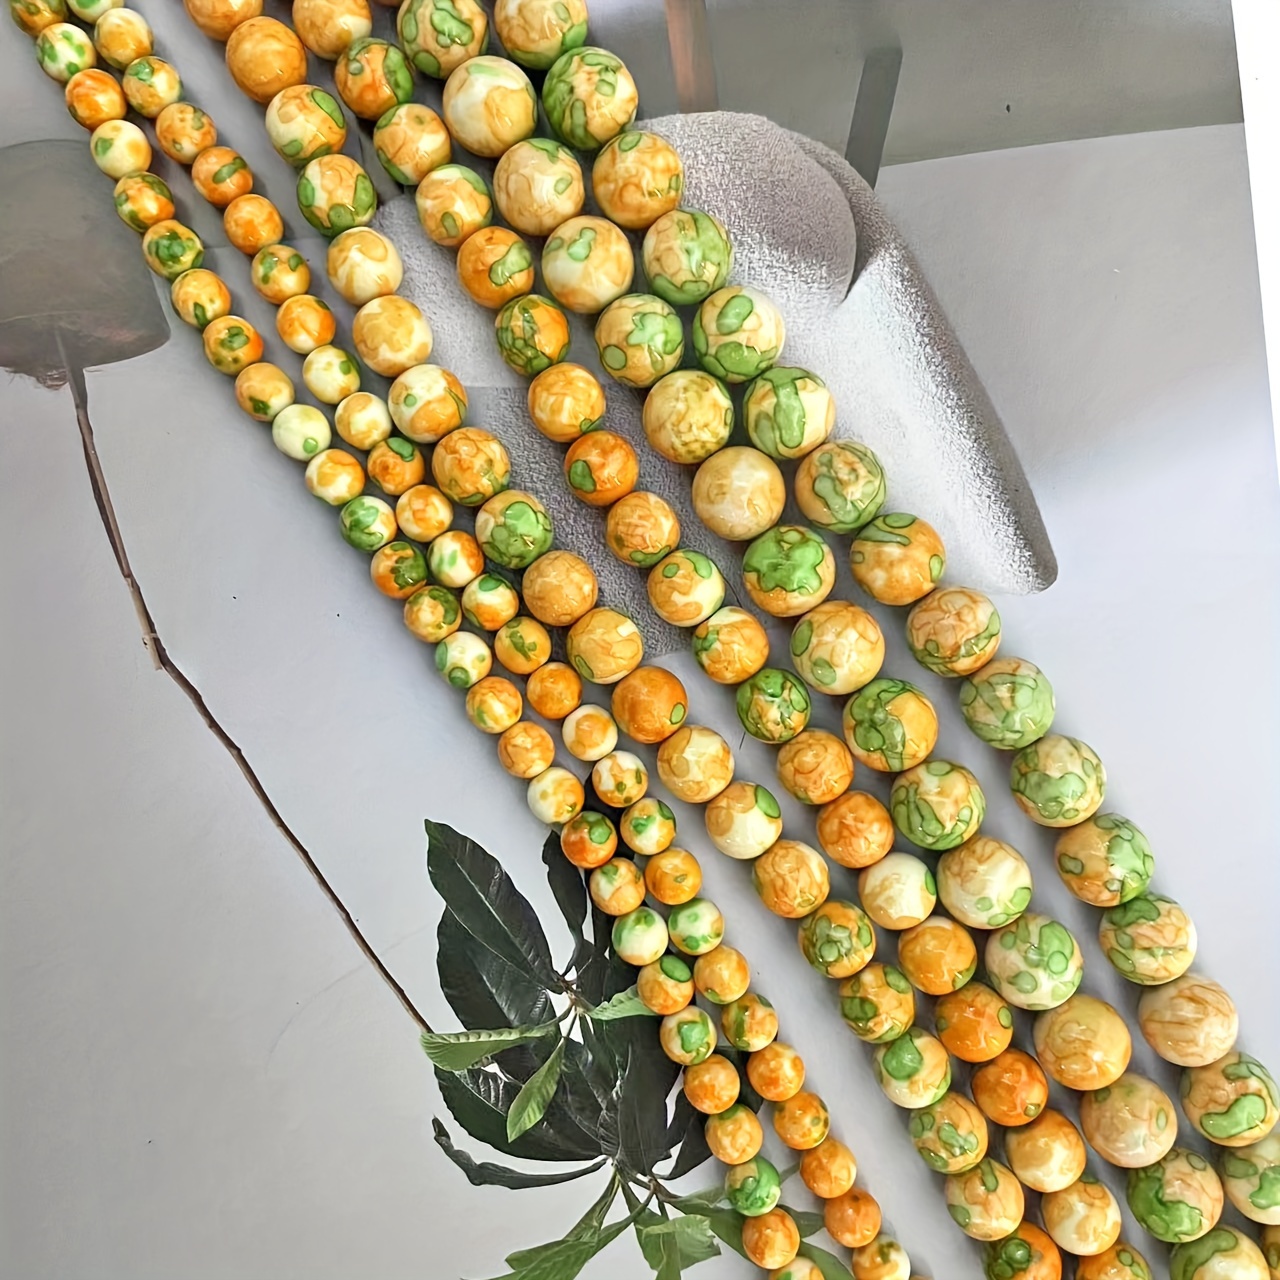 

1 Strand 18mm Natural Rain Flower Stone Beads, 6/8/10mm 30/22/18pcs Bohemian Fashion Loose Beads, Diy Handmade Bracelet Necklace Earrings Jewelry Making Beaded Accessories For Women